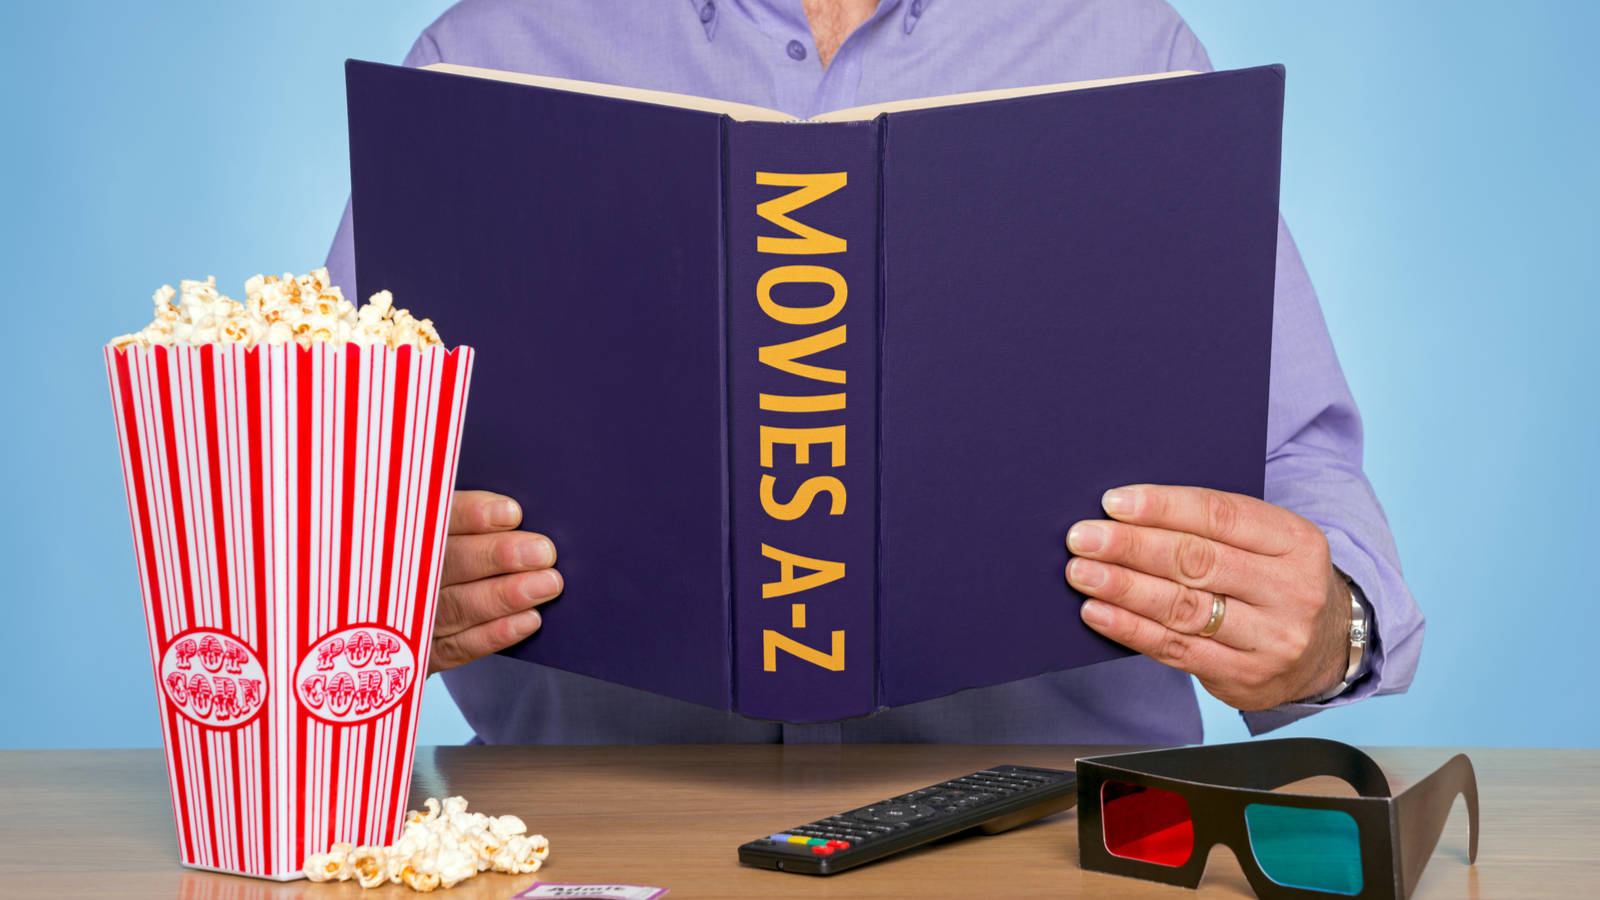 A person holding a book titled &quot;Movies A-Z&quot; and some popcorn